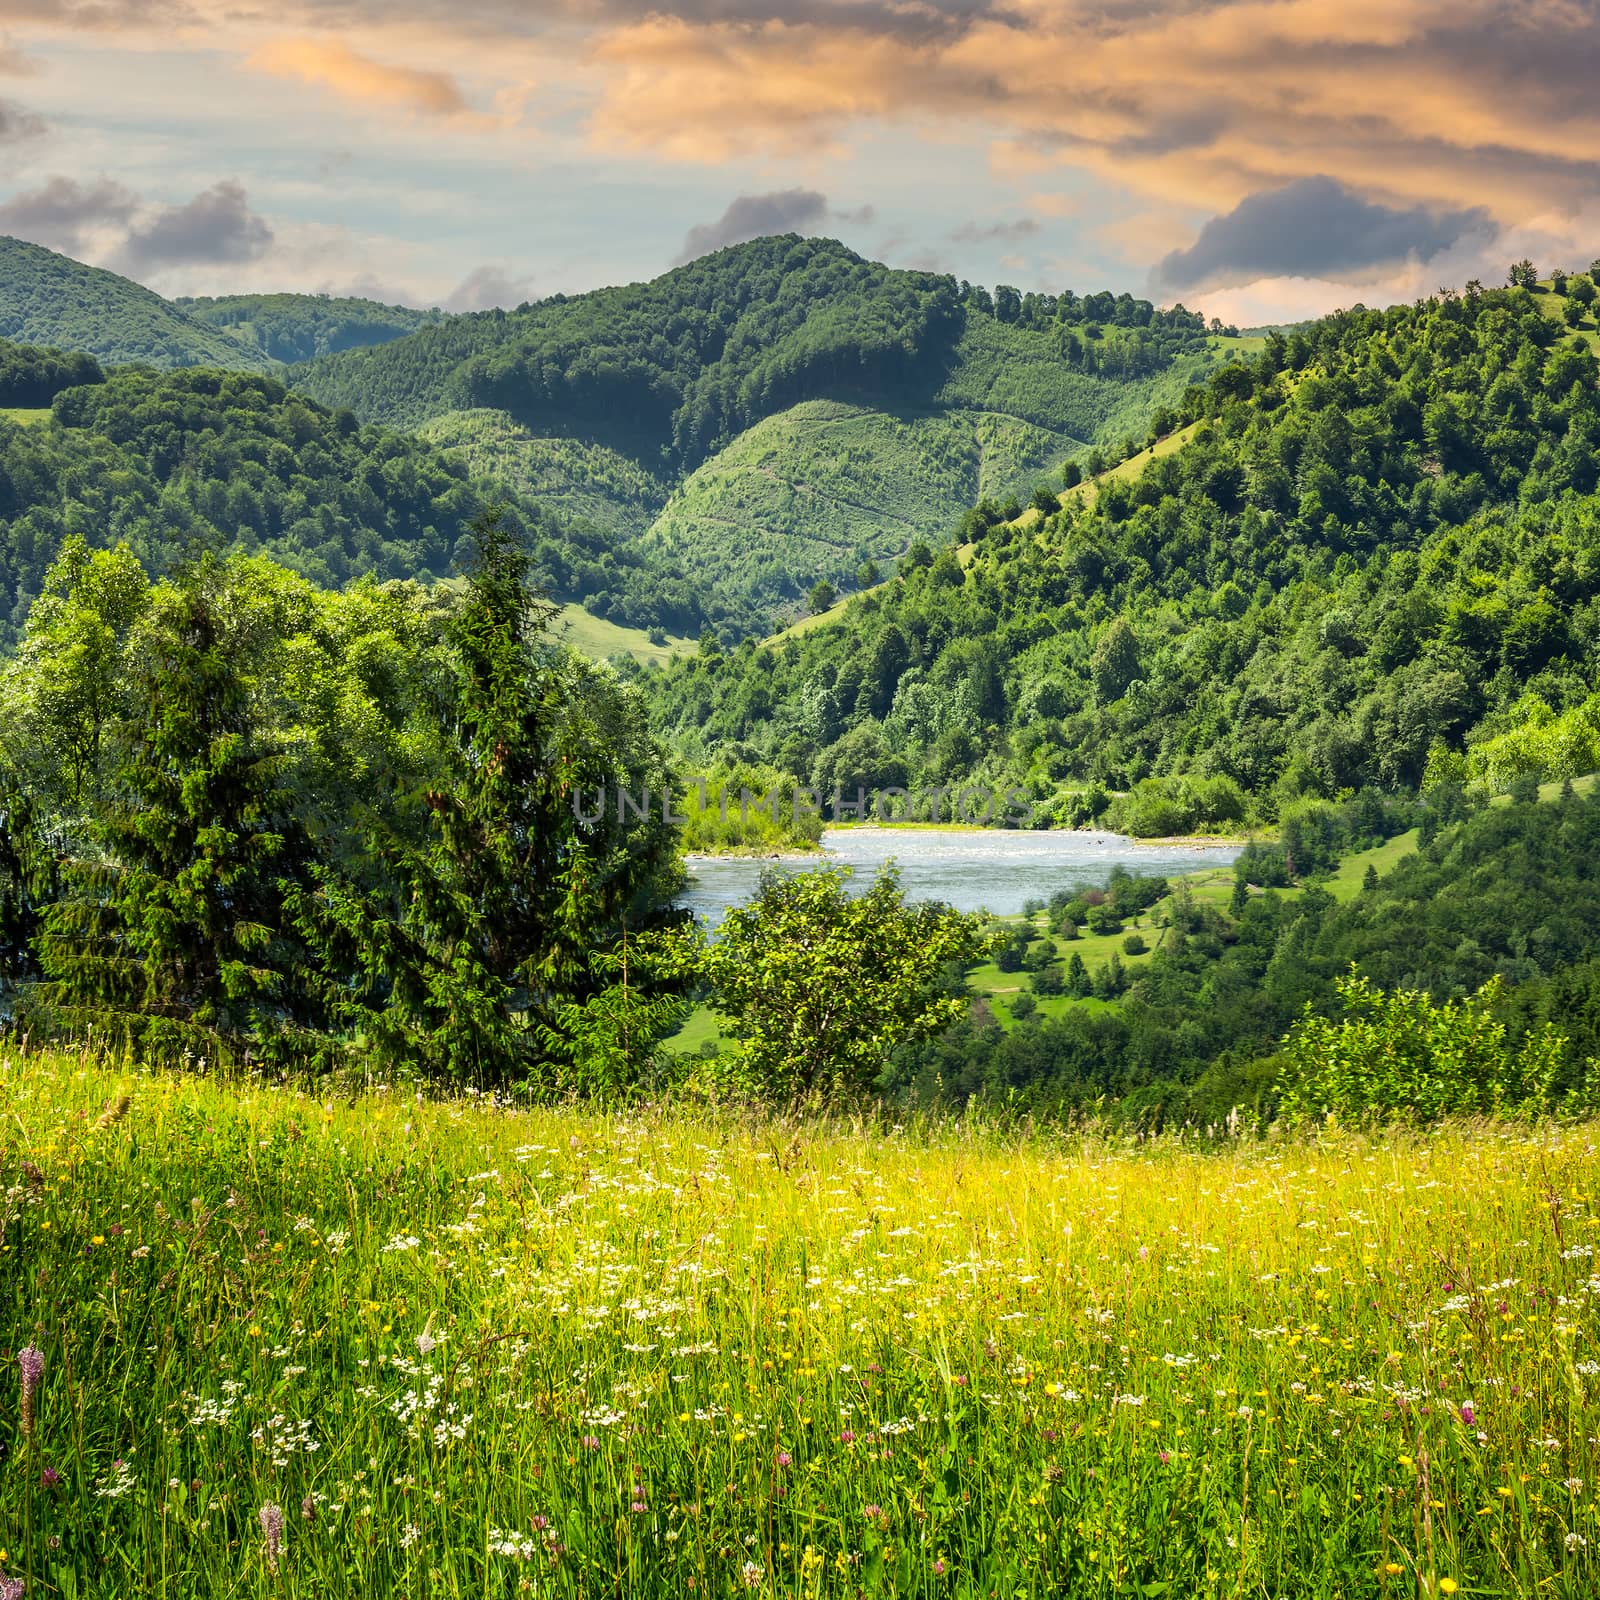 composite mountain summer landscape. pine trees on hillside meadow with wild flowers near the river in mountains